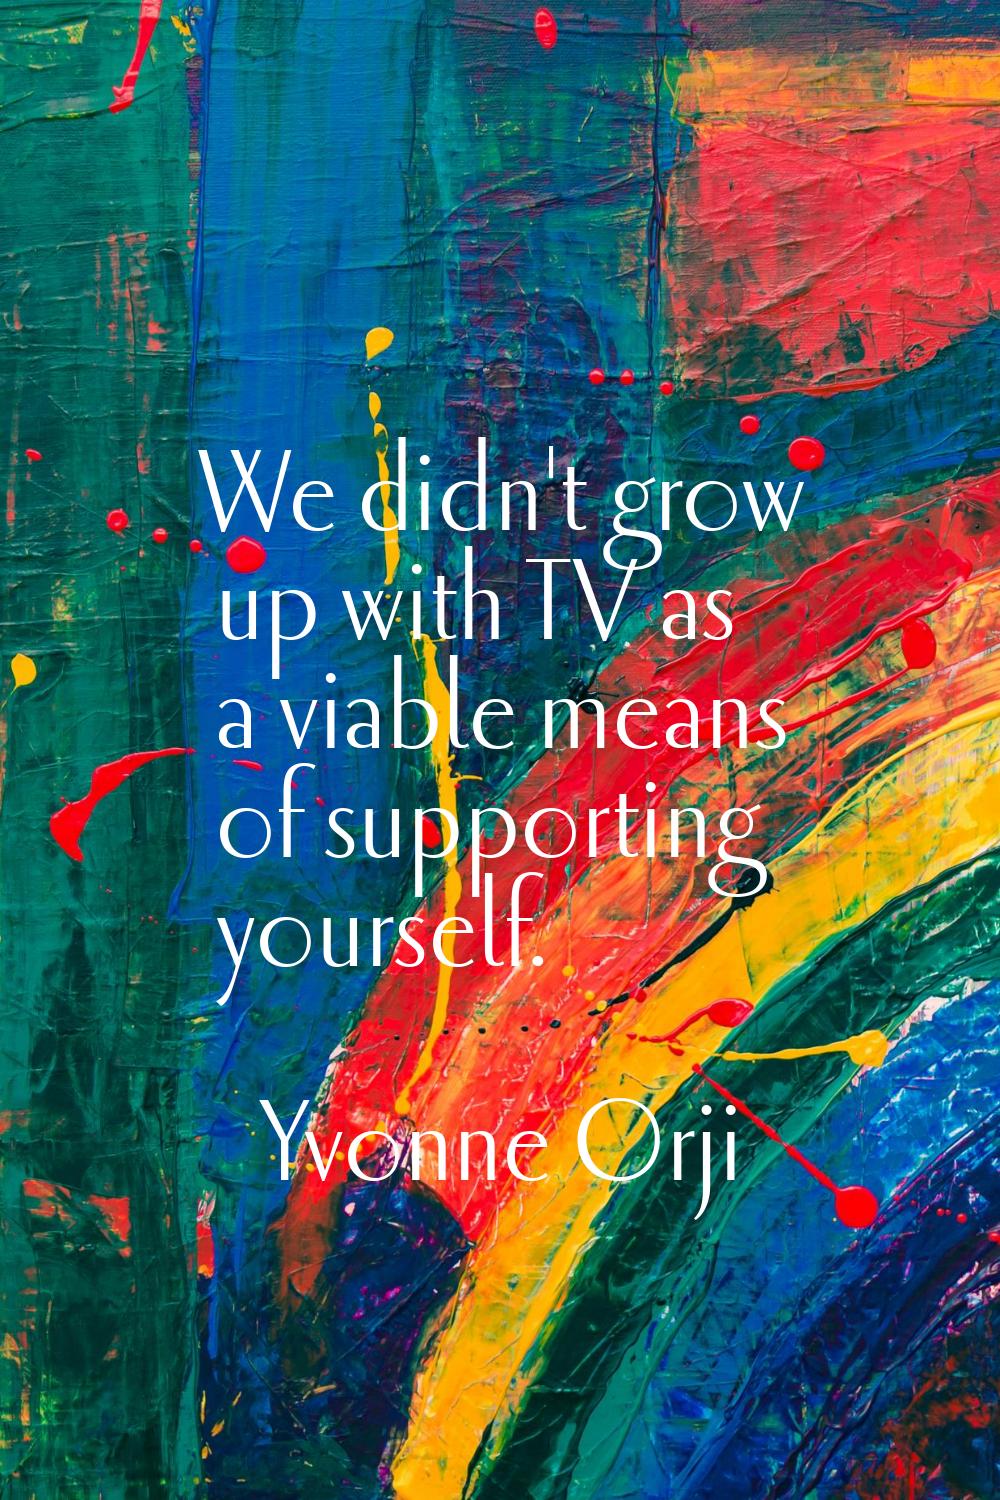 We didn't grow up with TV as a viable means of supporting yourself.